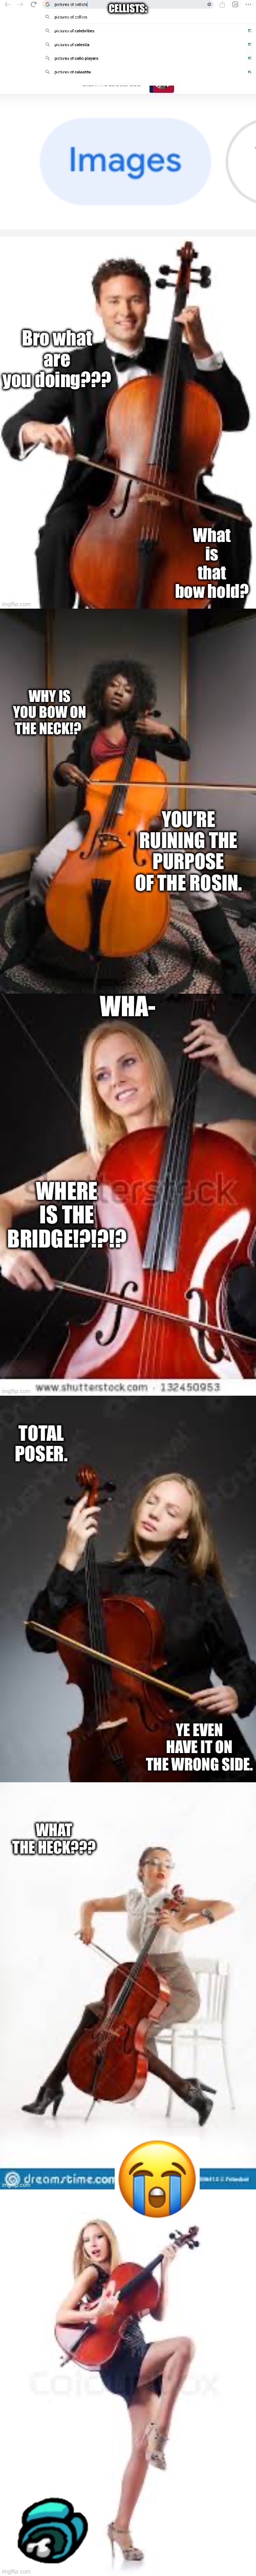 For the cellists | Bro what are you doing??? What is that bow hold? WHY IS YOU BOW ON THE NECK!? YOU’RE RUINING THE PURPOSE OF THE ROSIN. WHA-; WHERE IS THE BRIDGE!?!?!? TOTAL POSER. YE EVEN HAVE IT ON THE WRONG SIDE. WHAT THE HECK??? | made w/ Imgflip meme maker